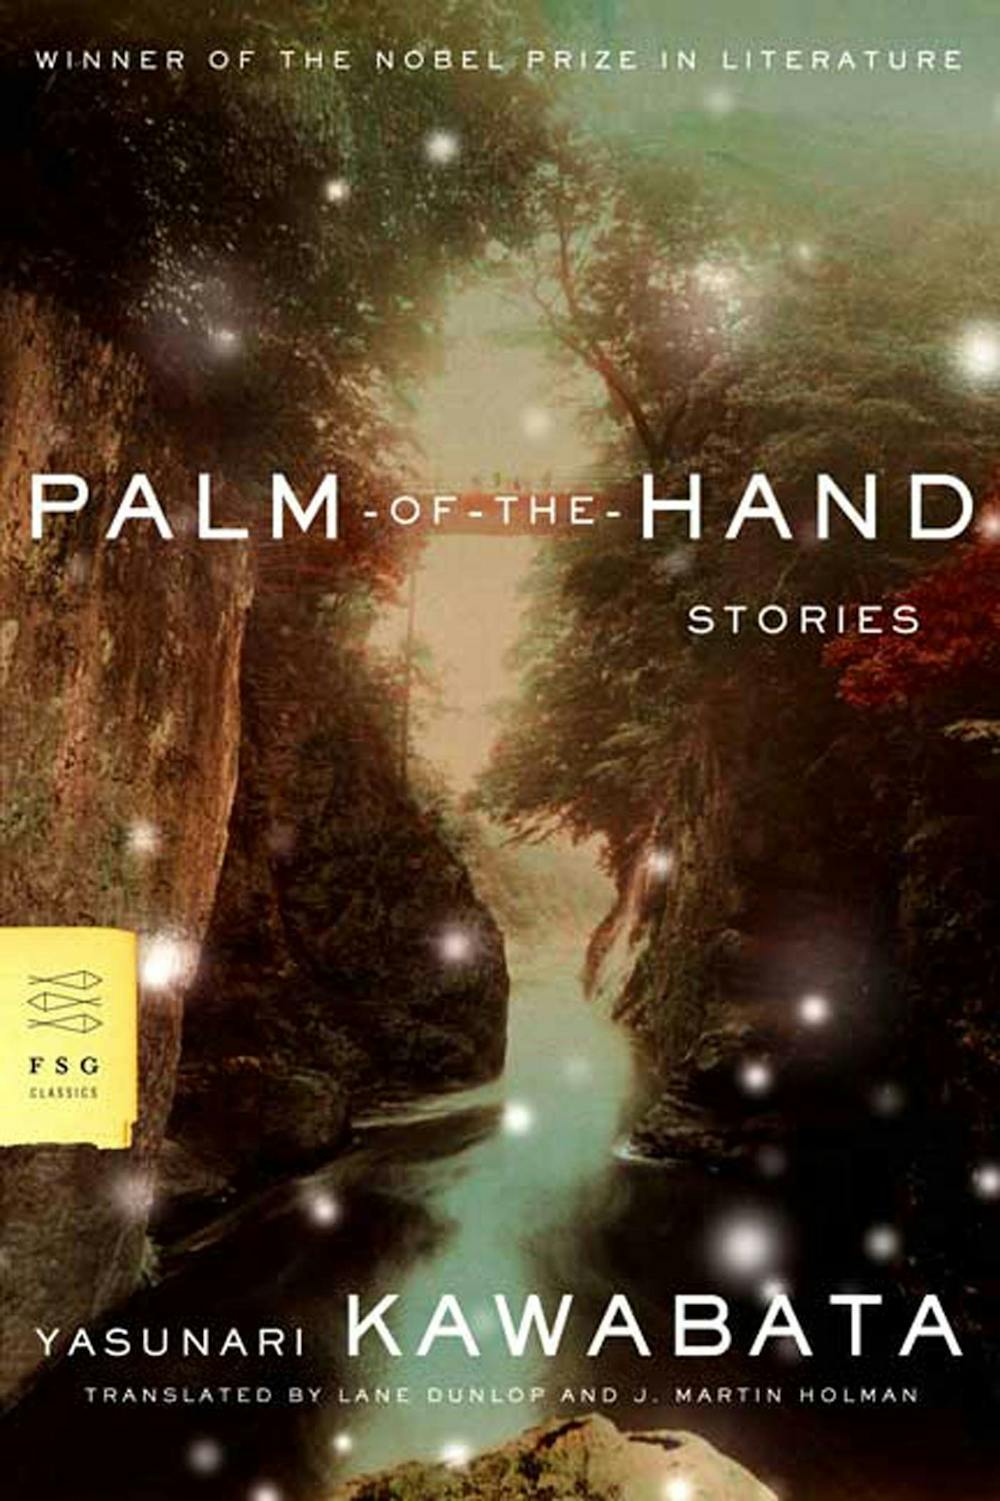 Palm-of-the-Hand Stories - Tradebook for Courses